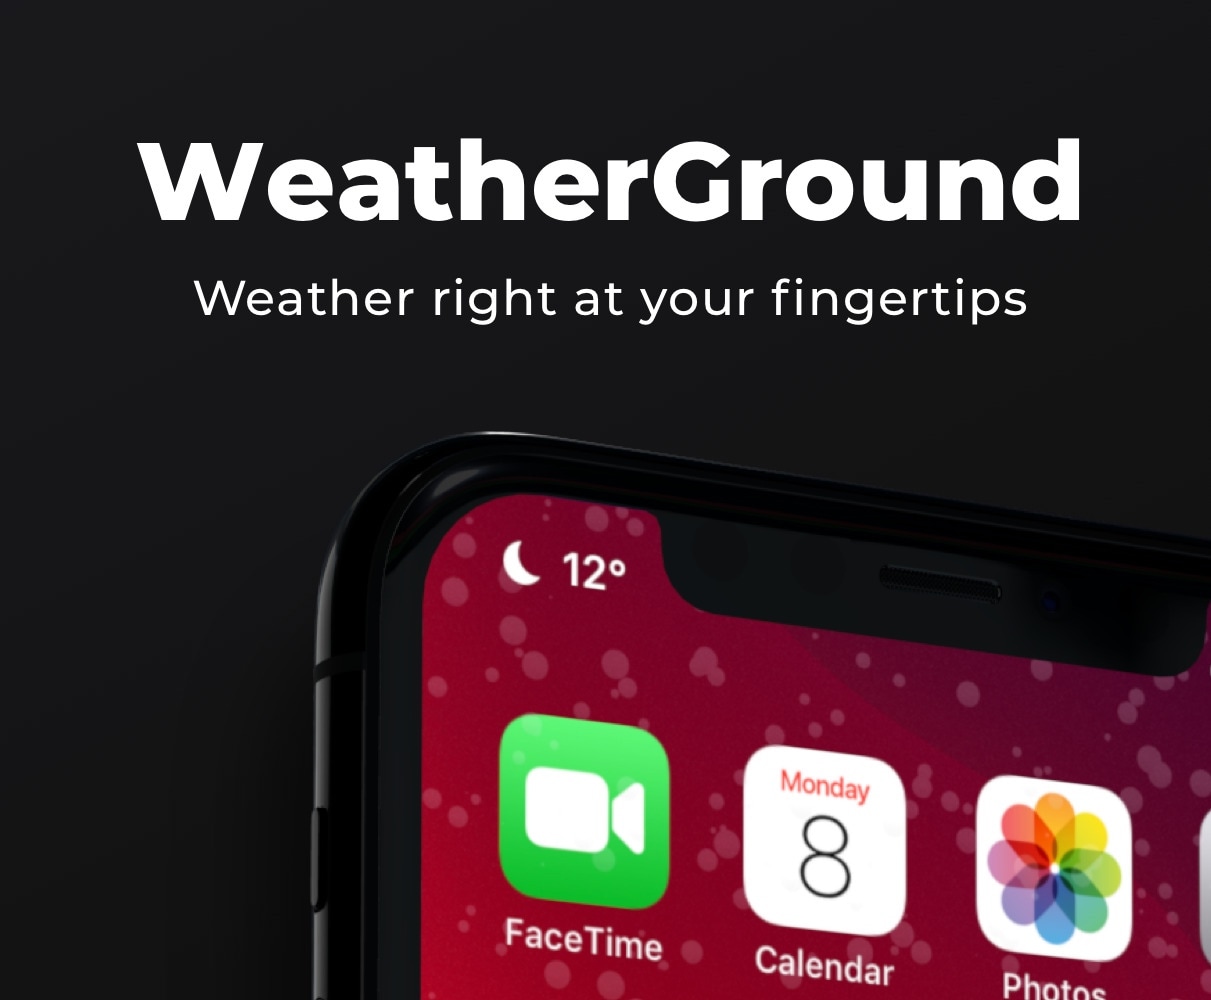 WeatherGround provides more dynamic weather views on jailbroken iPhones.